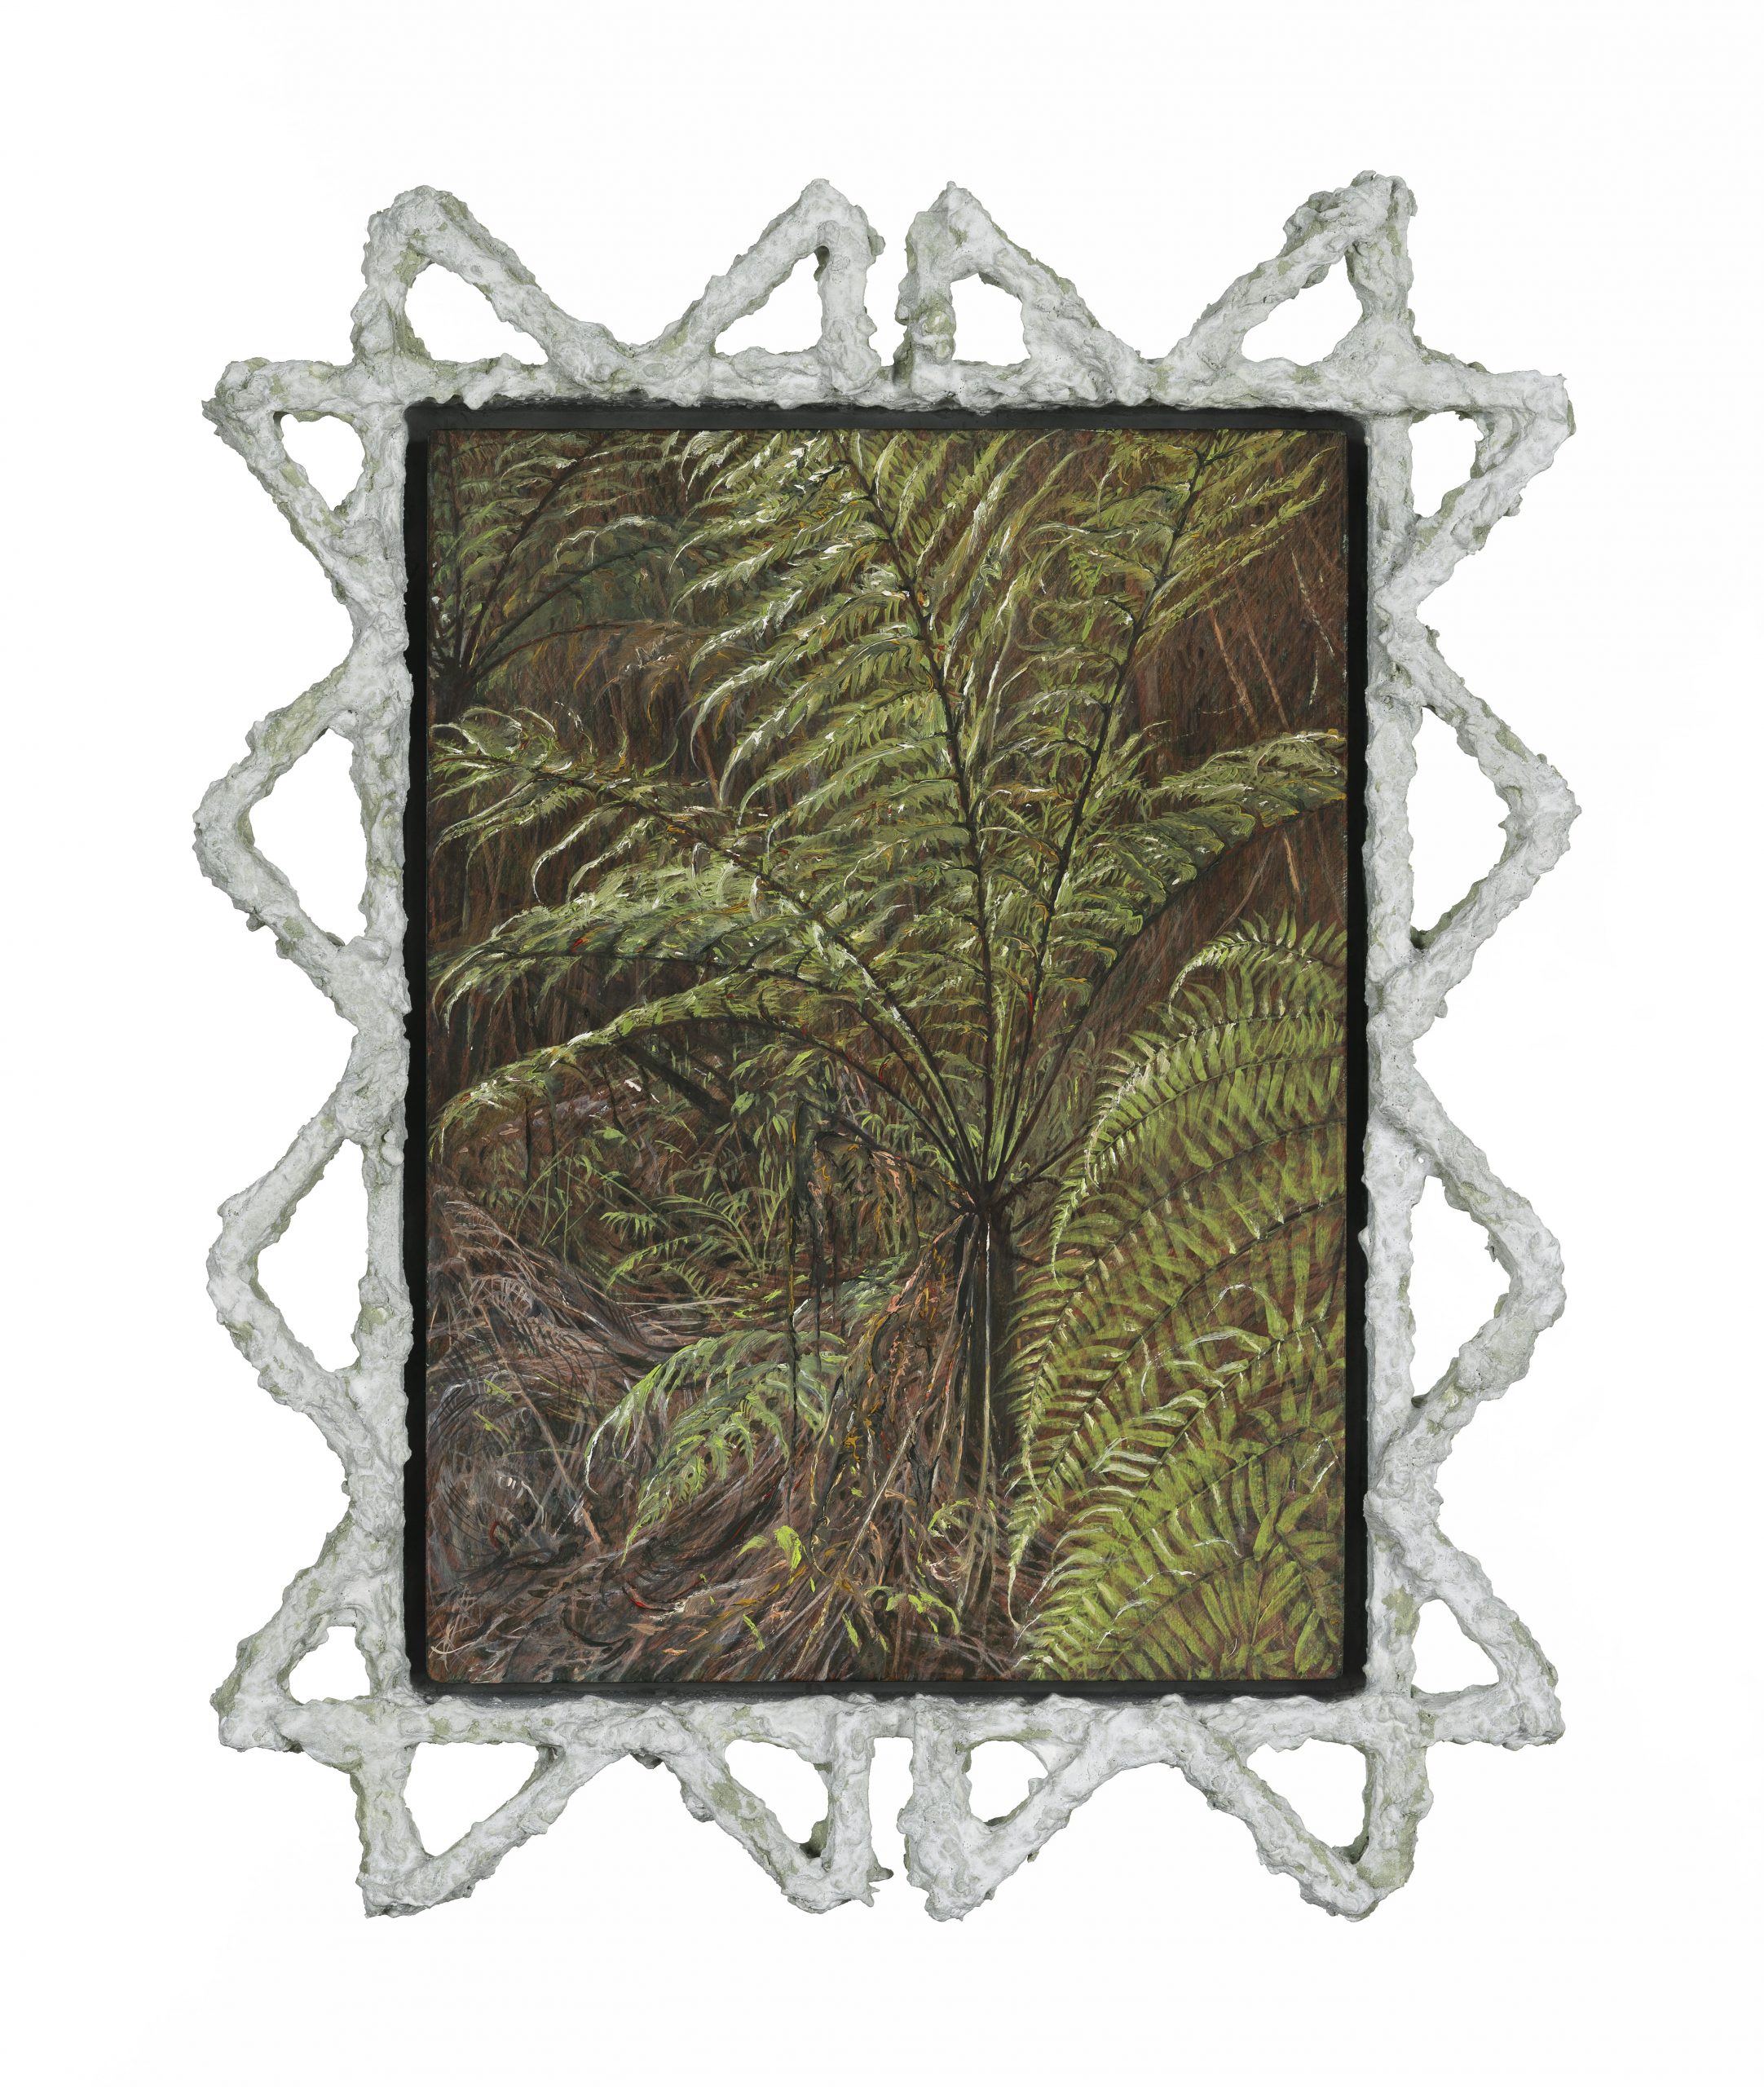 Fern Specimen 04 36x39cm Oil paint on board framed in timber paper pulp and cement